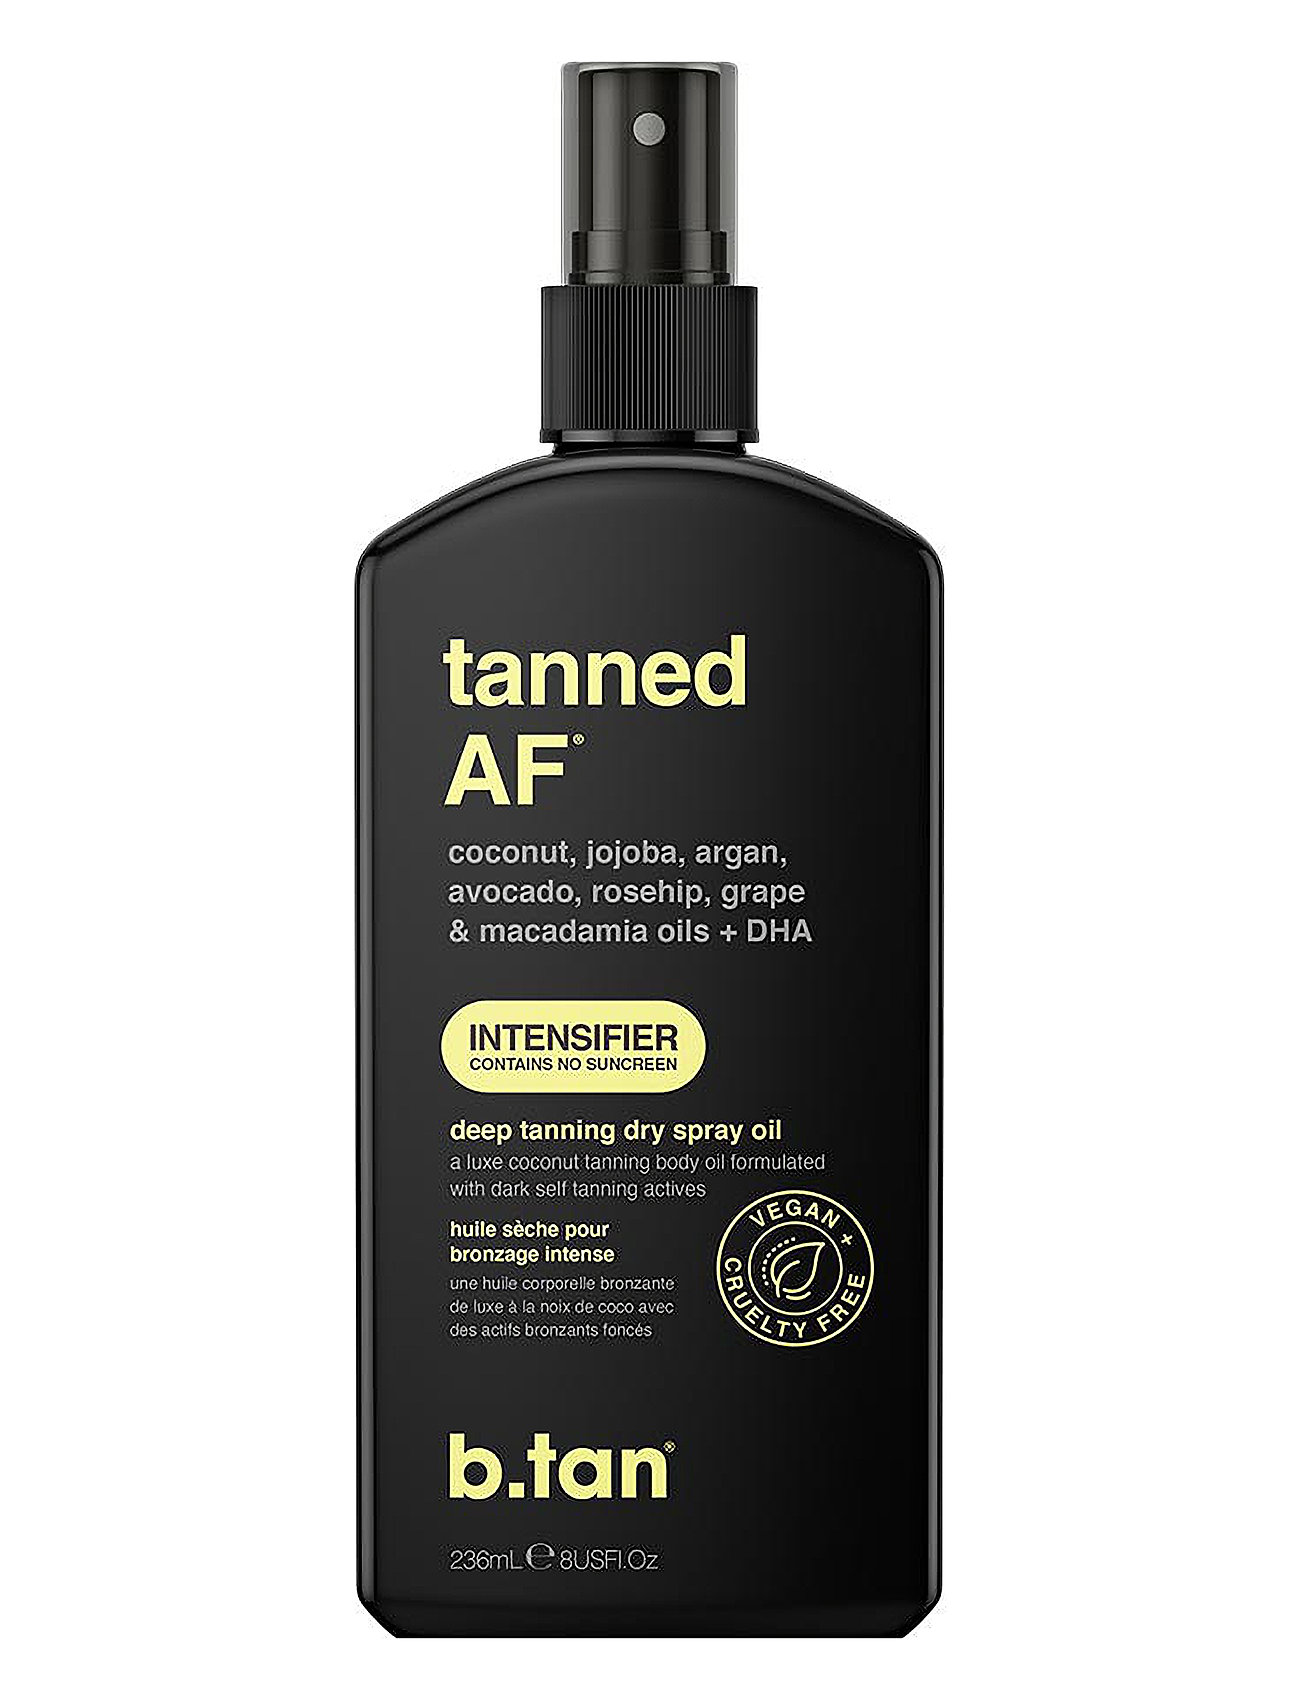 Tanned Af Intensifier Deep Tanning Dry Spray Oil Beauty Women Skin Care Sun Products Self Tanners Mists Nude B.Tan